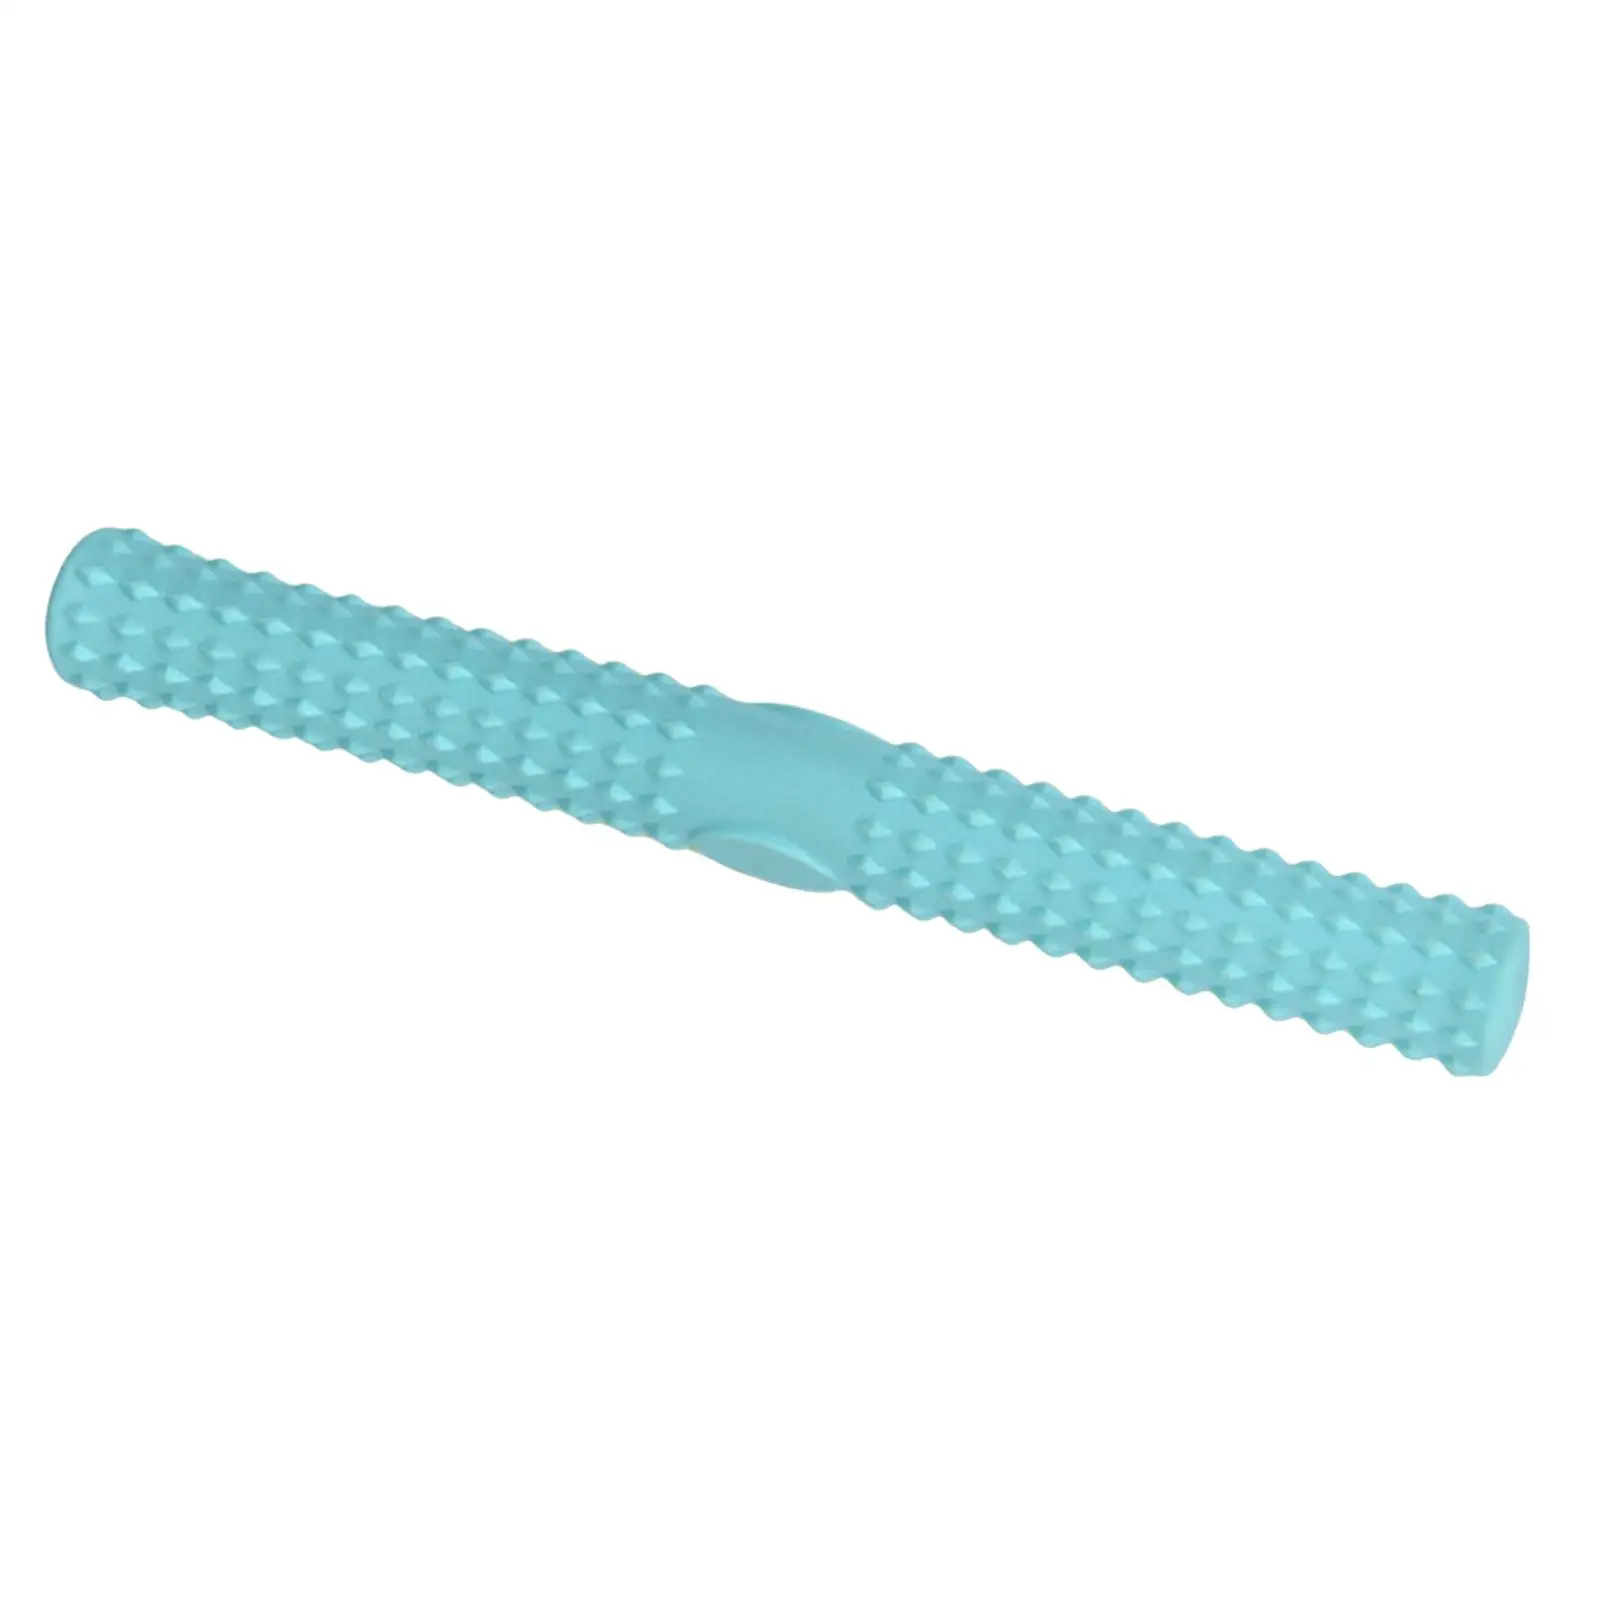 Twist Exerciser Bars Handheld Fitness Muscle Roller Tool Hand Forearm Strengthener Massage Wand for Legs Body Thigh Travel